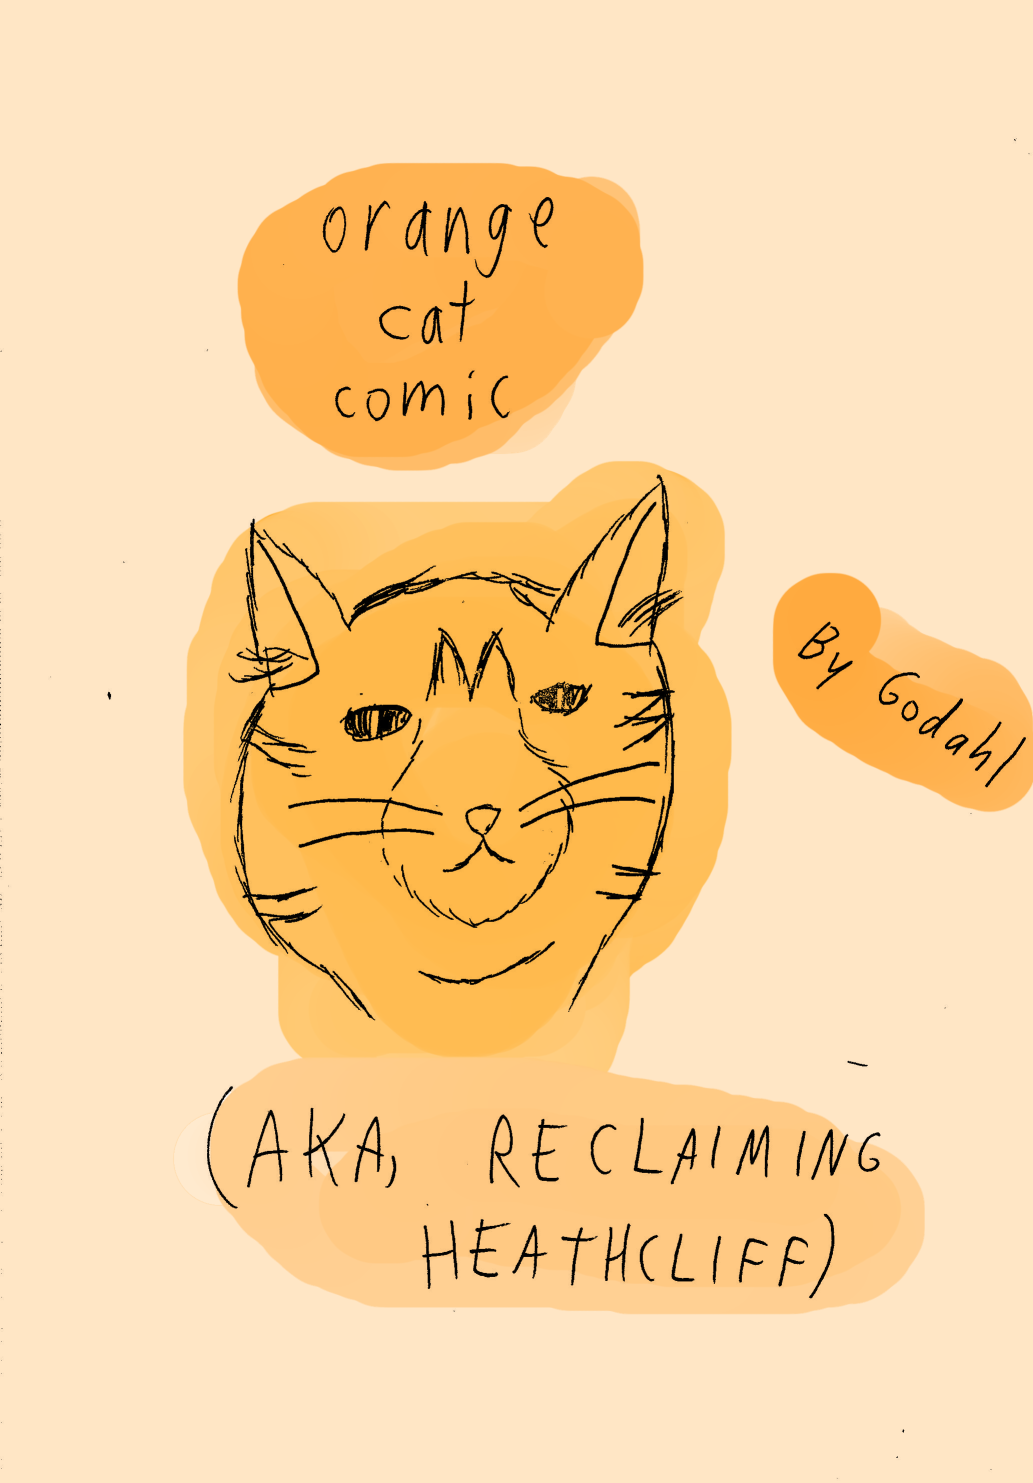 Orange Cat Comic (AKA Reclaiming Heathcliff) By Godahl Drury. A semi realistic picture of an orange cat is on the cover.